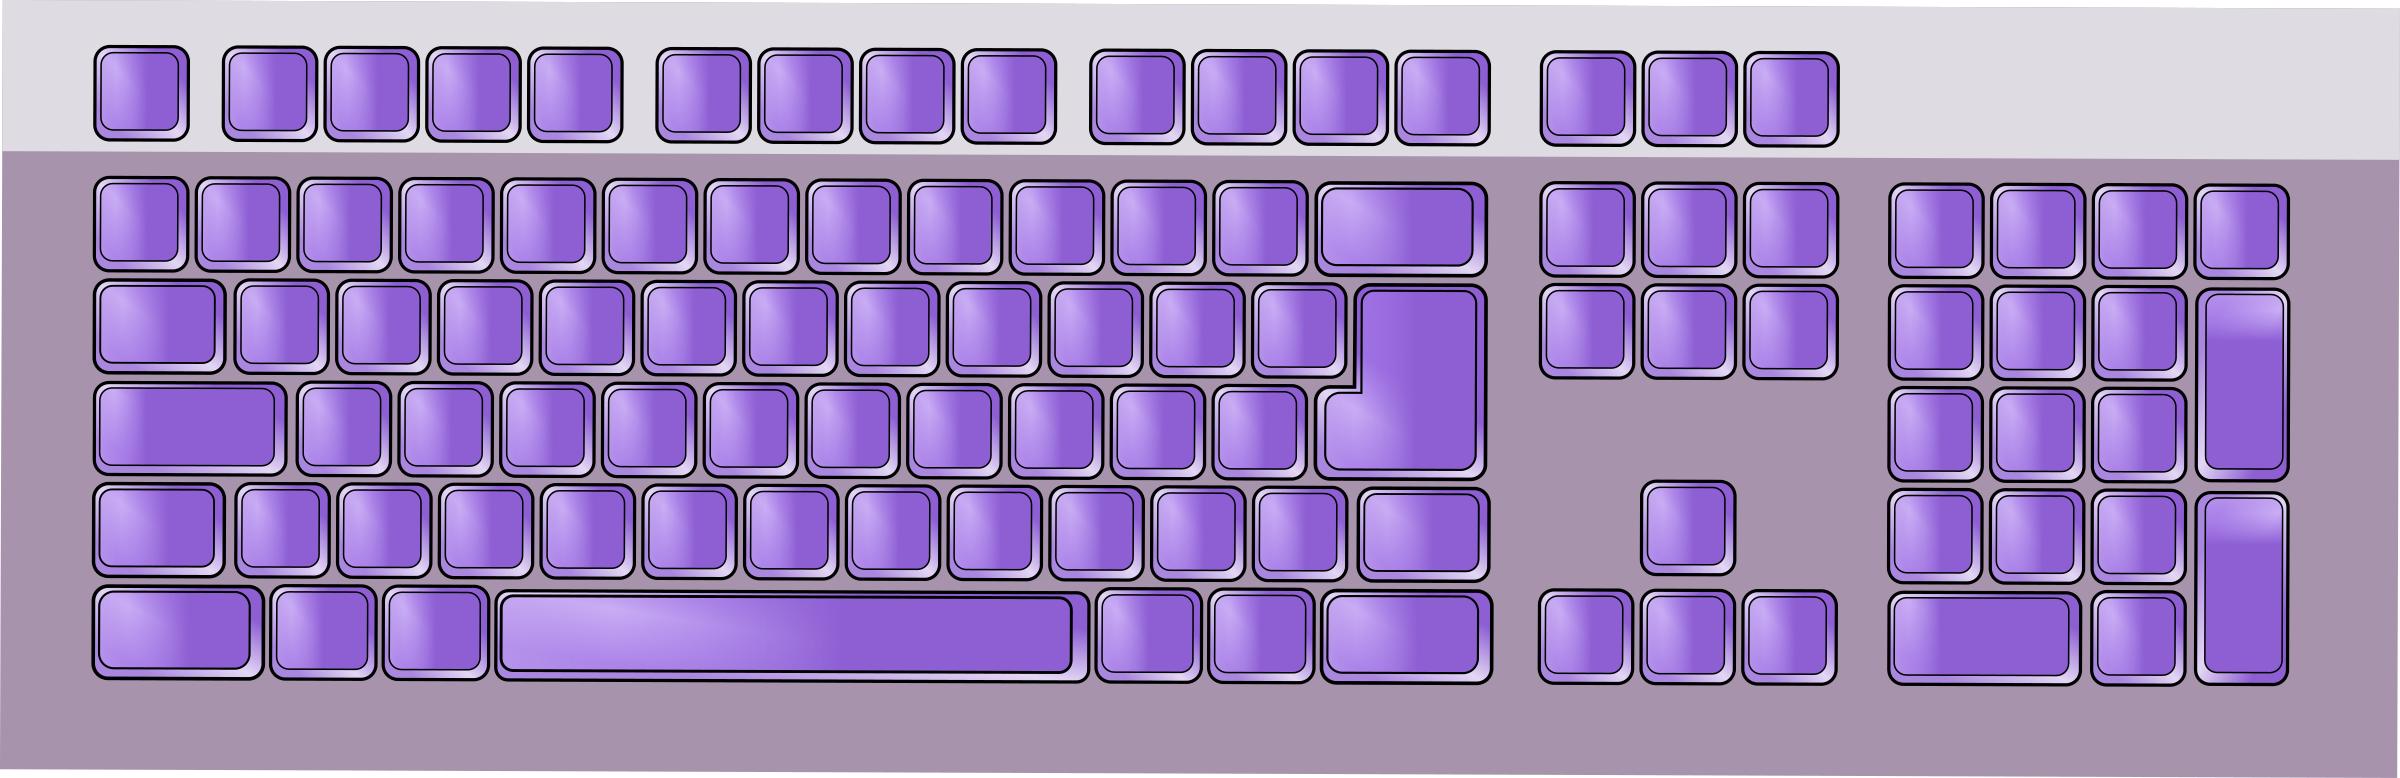 keyboard PNG icons